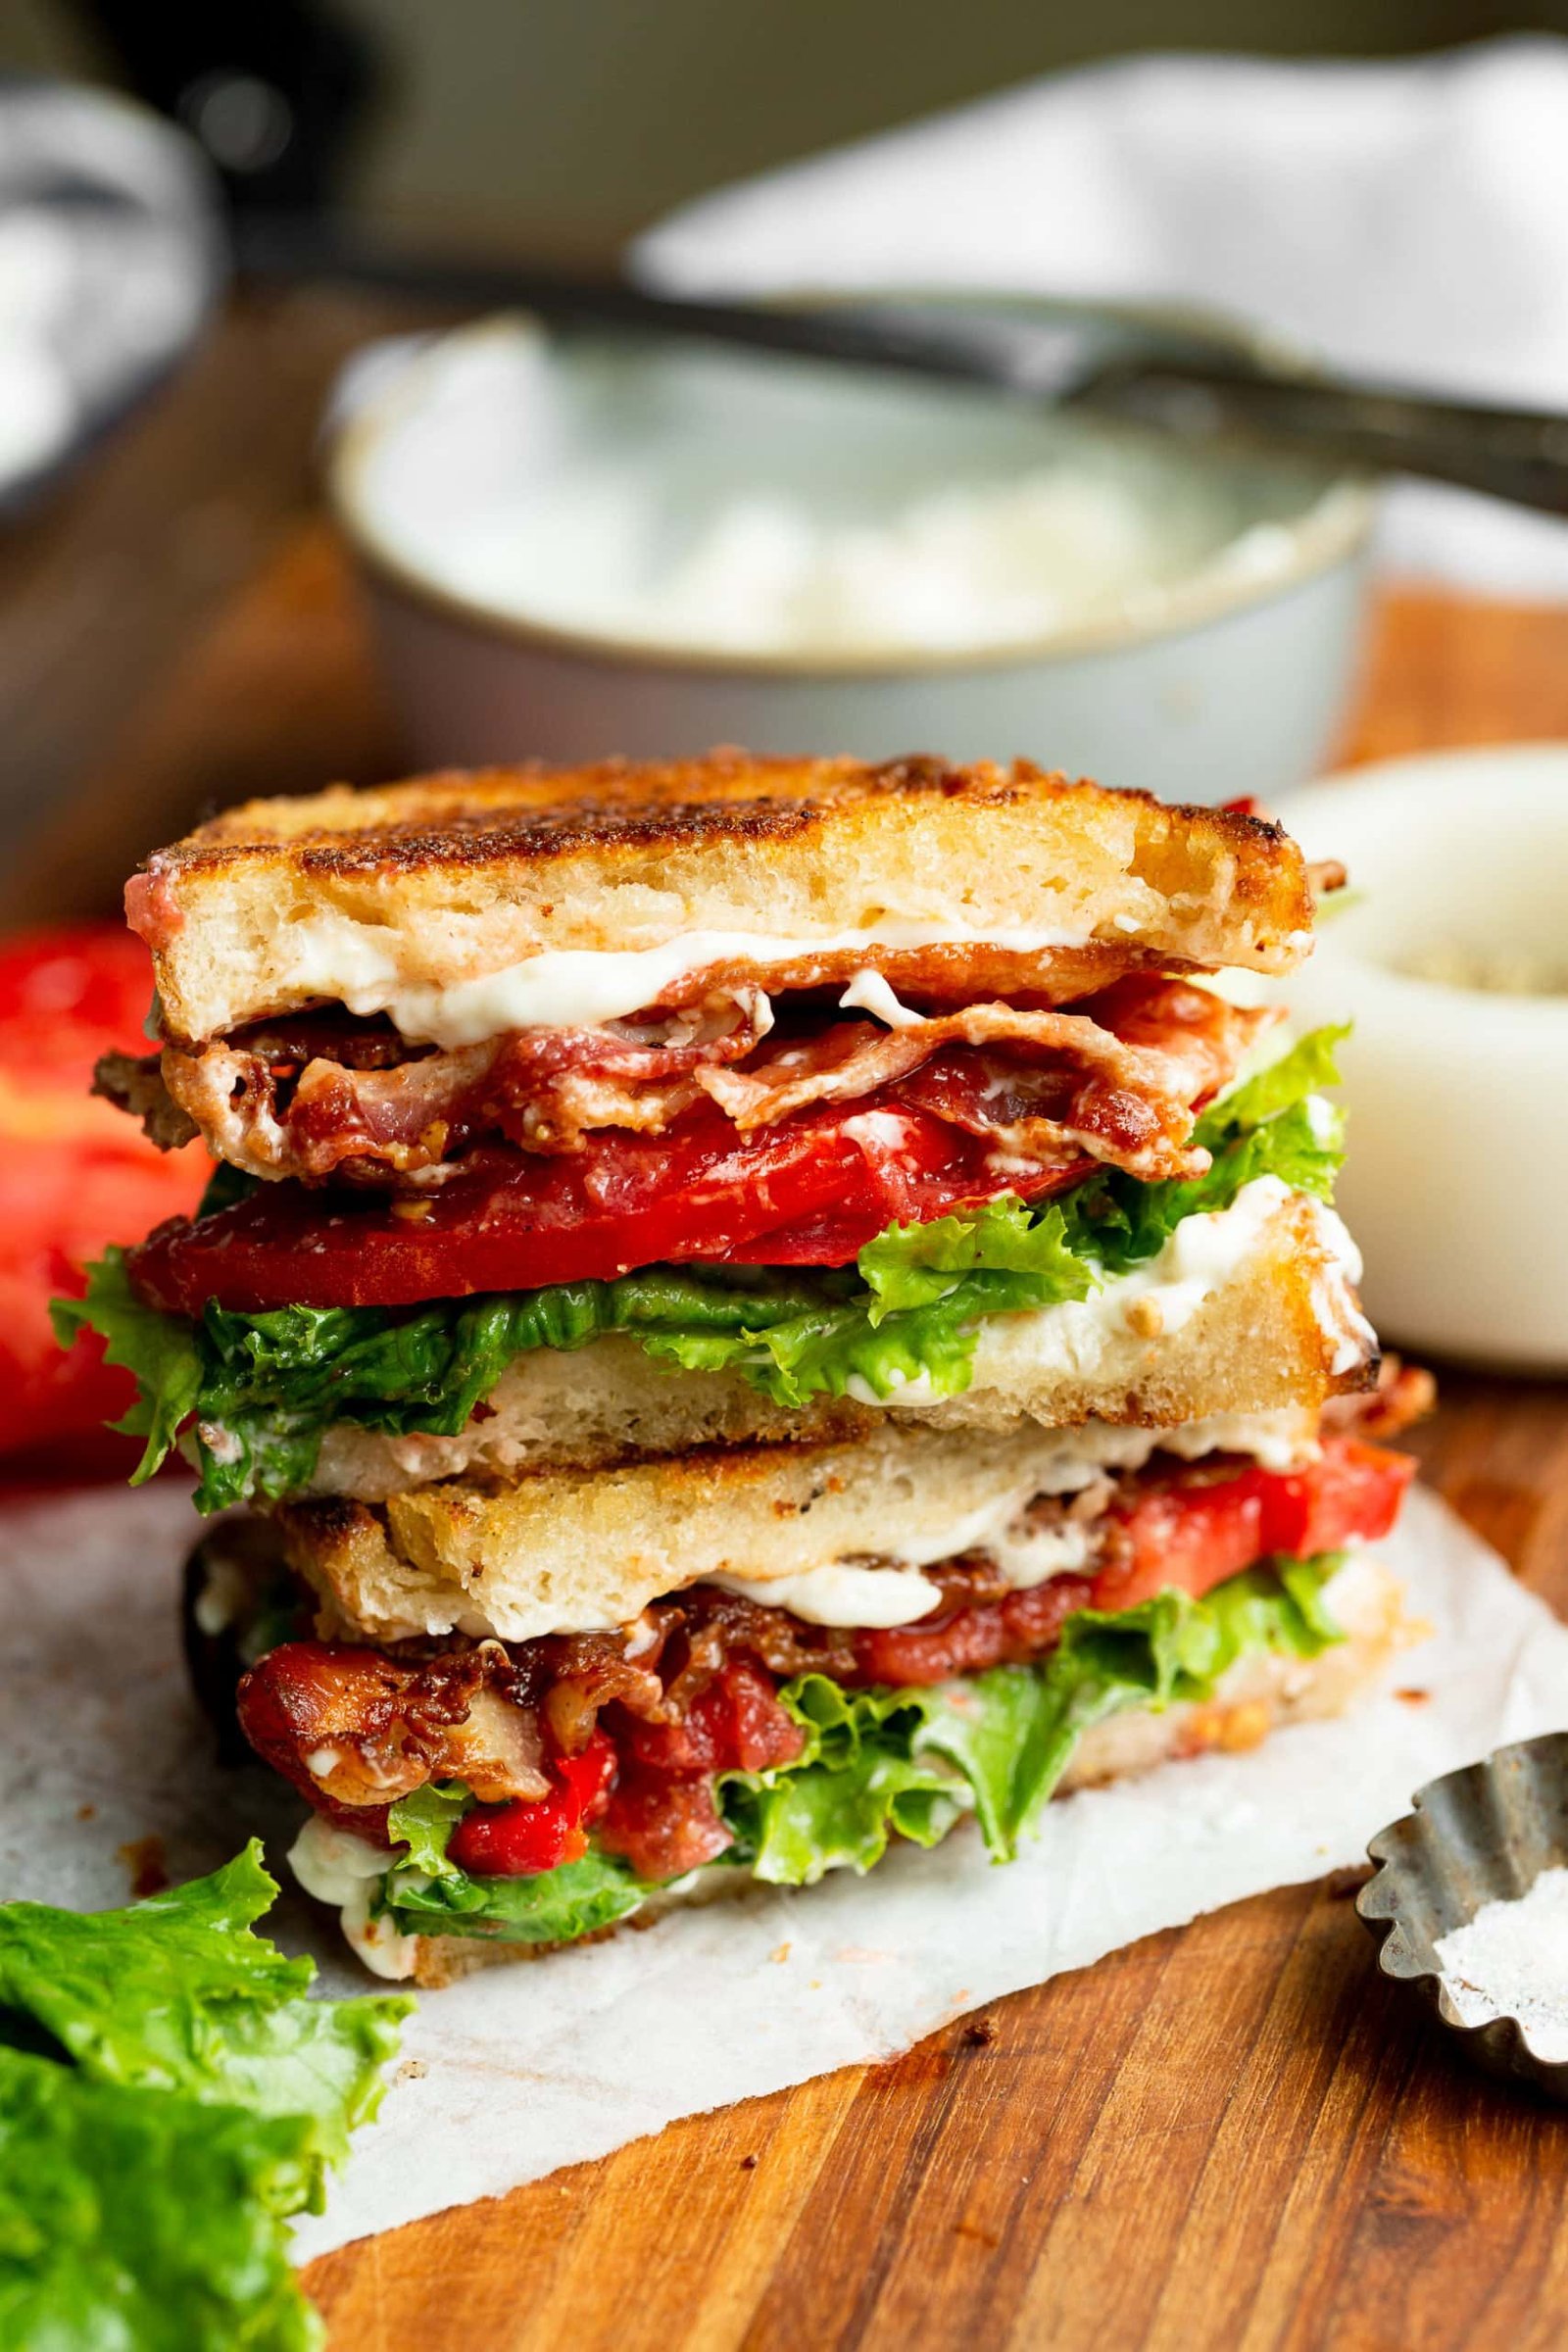 a photo of a perfect BLT sandwich with golden toasted bread, slices of crispy bacon, tomato slices and lettuce with mayo slightly seeping out the sides.